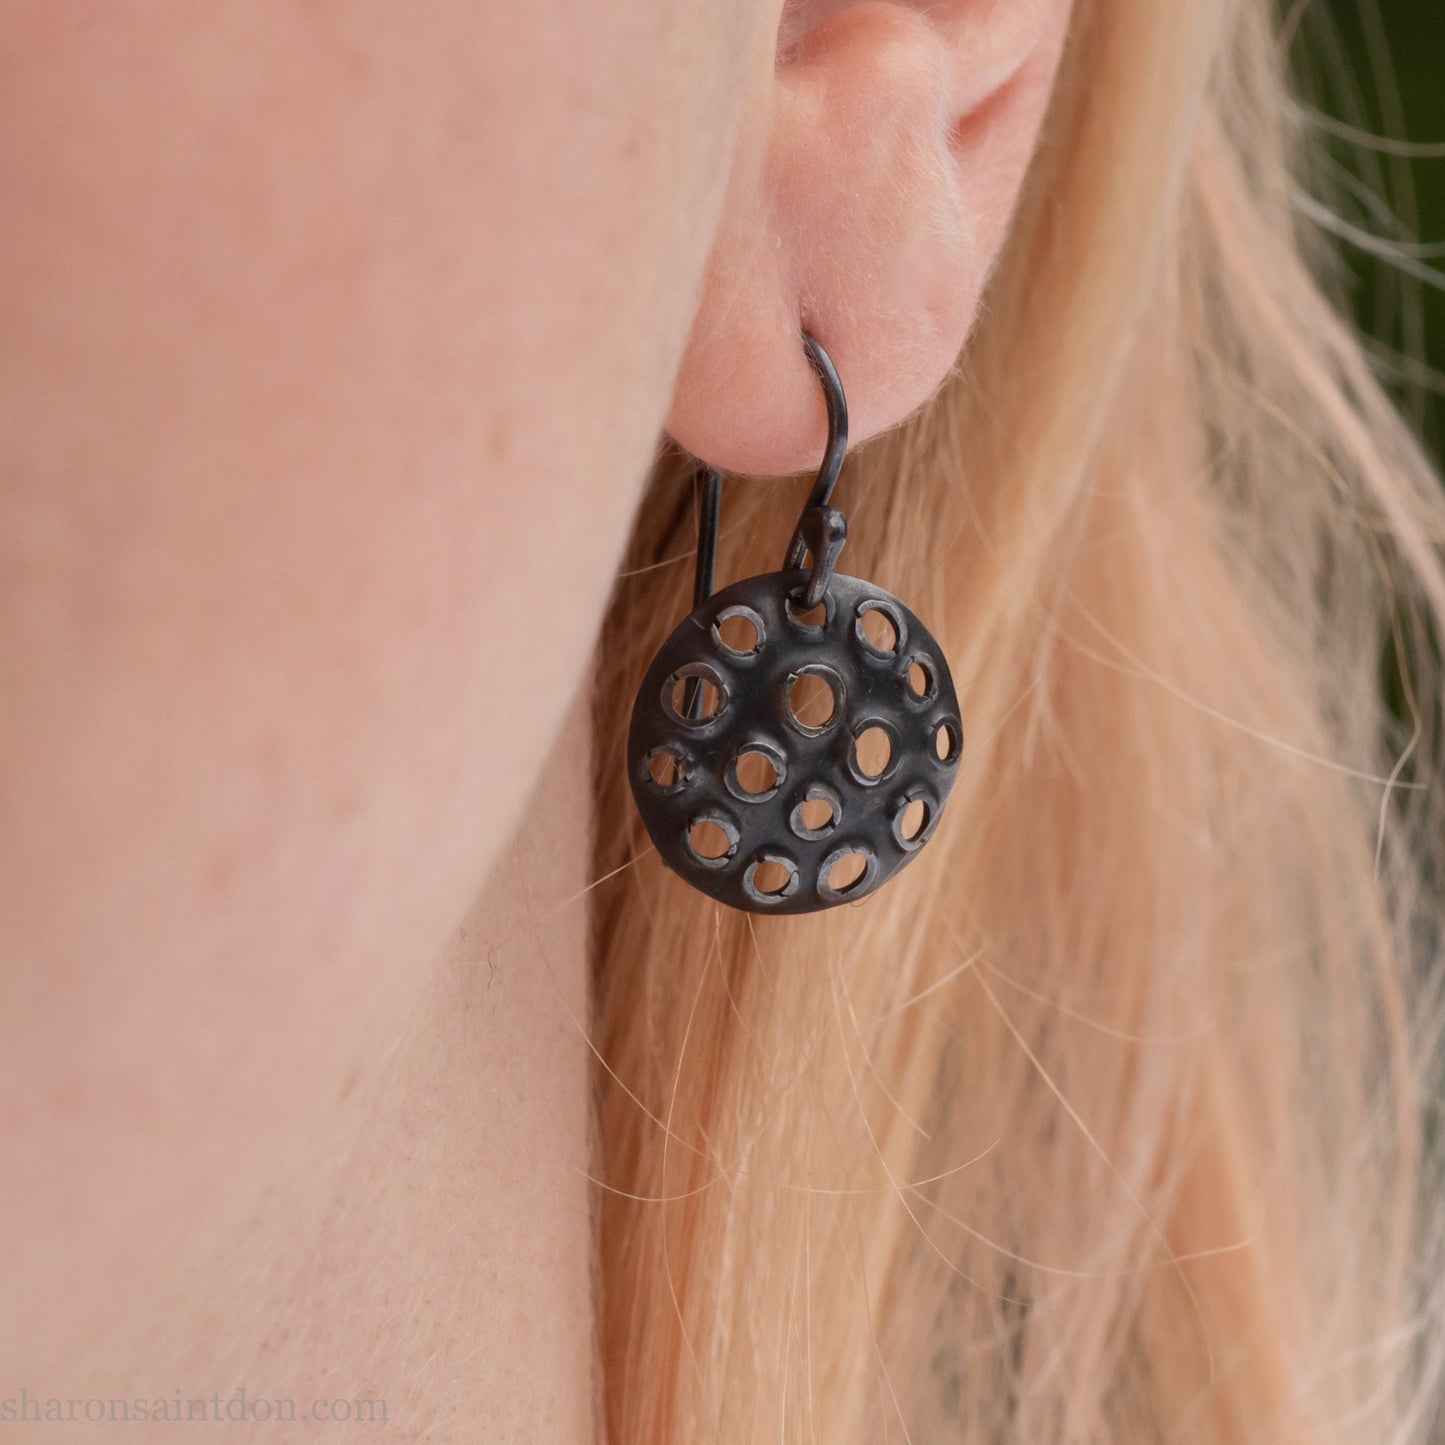 Handmade 925 sterling silver earrings. Oxidized black dangle round discs made by Sharon SaintDon in North America.